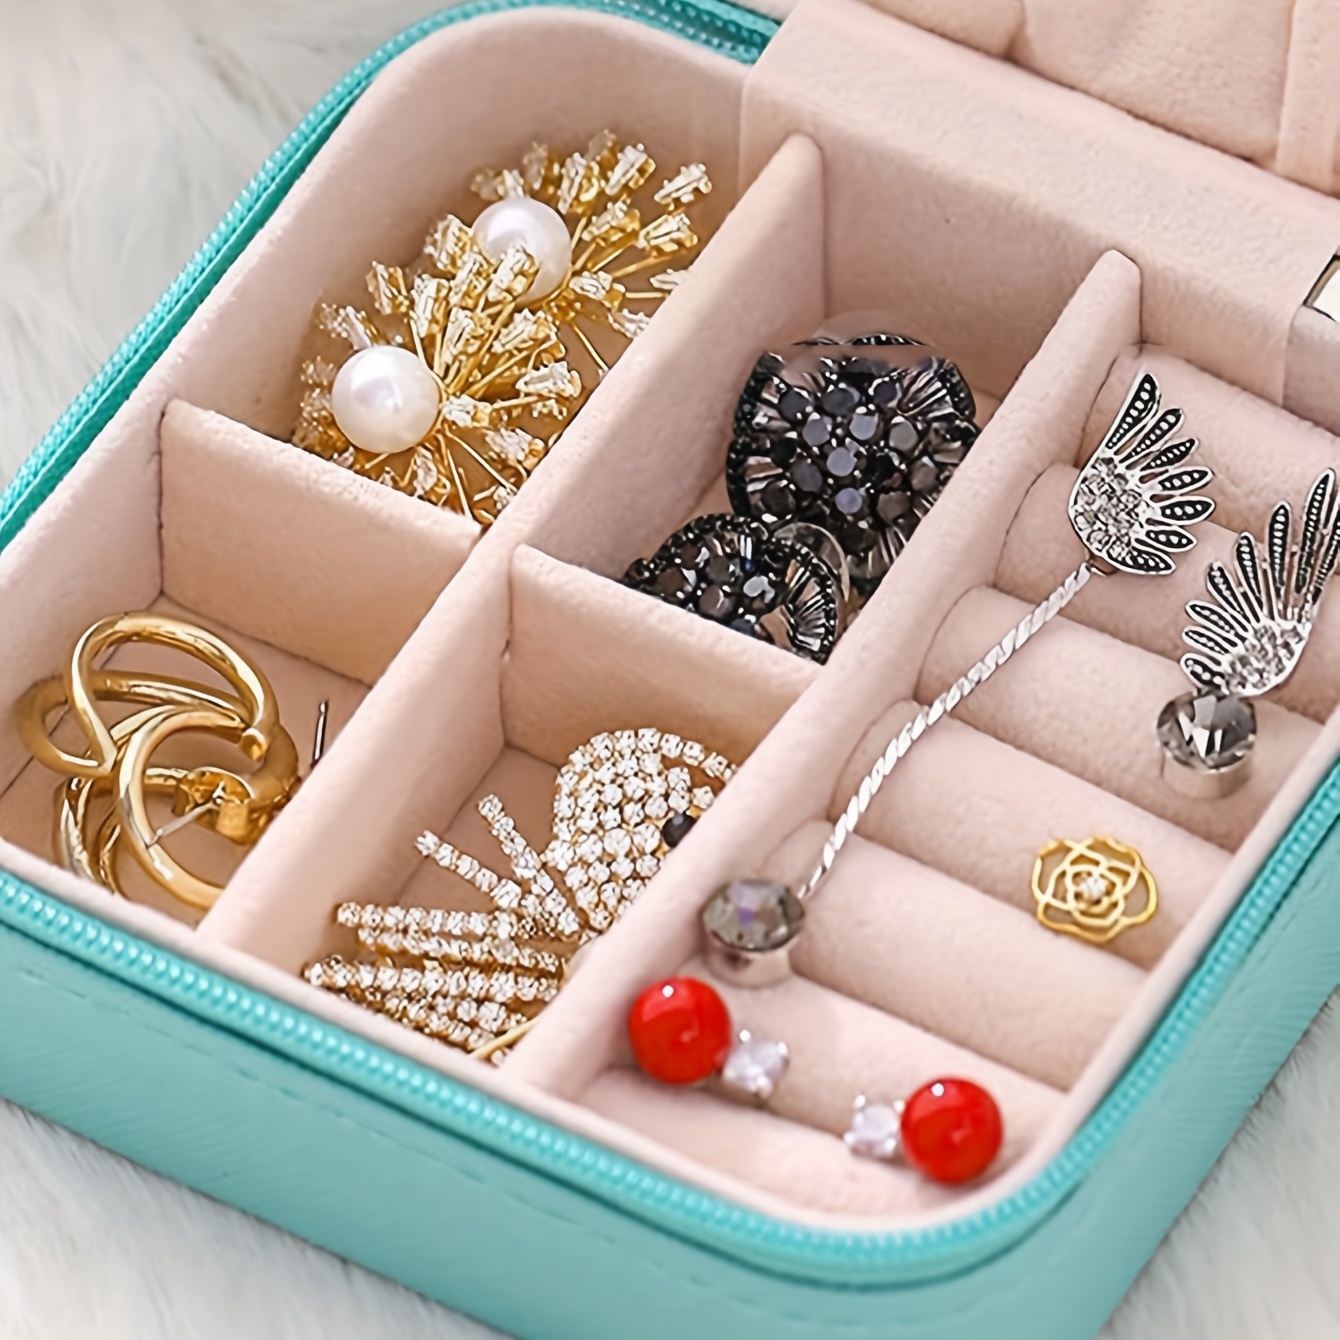 Yonzone Jewellery Box Organiser Travel Case Storage Small Boxes for Rings Earrings Necklace Bracelets, Double Layer Faux Leather Jewelry Gift Girls